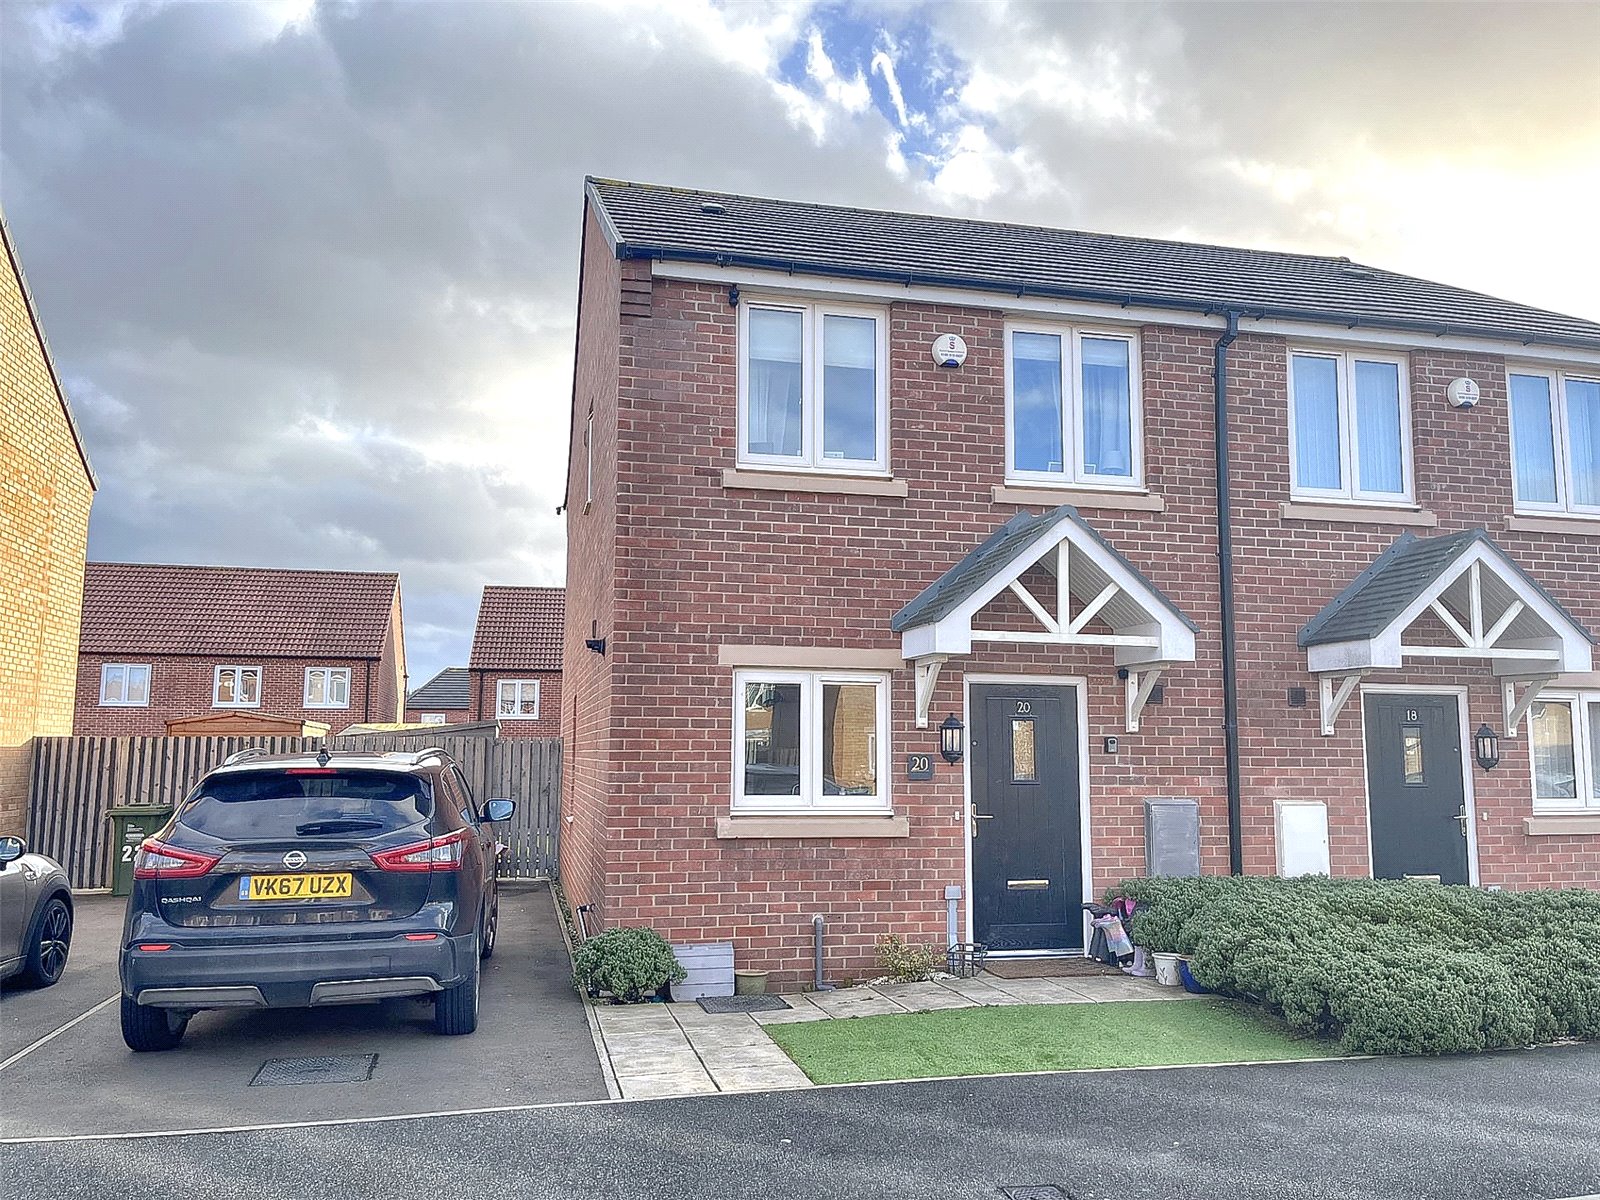 2 bed house for sale in Braunton Way, Yarm - Property Image 1